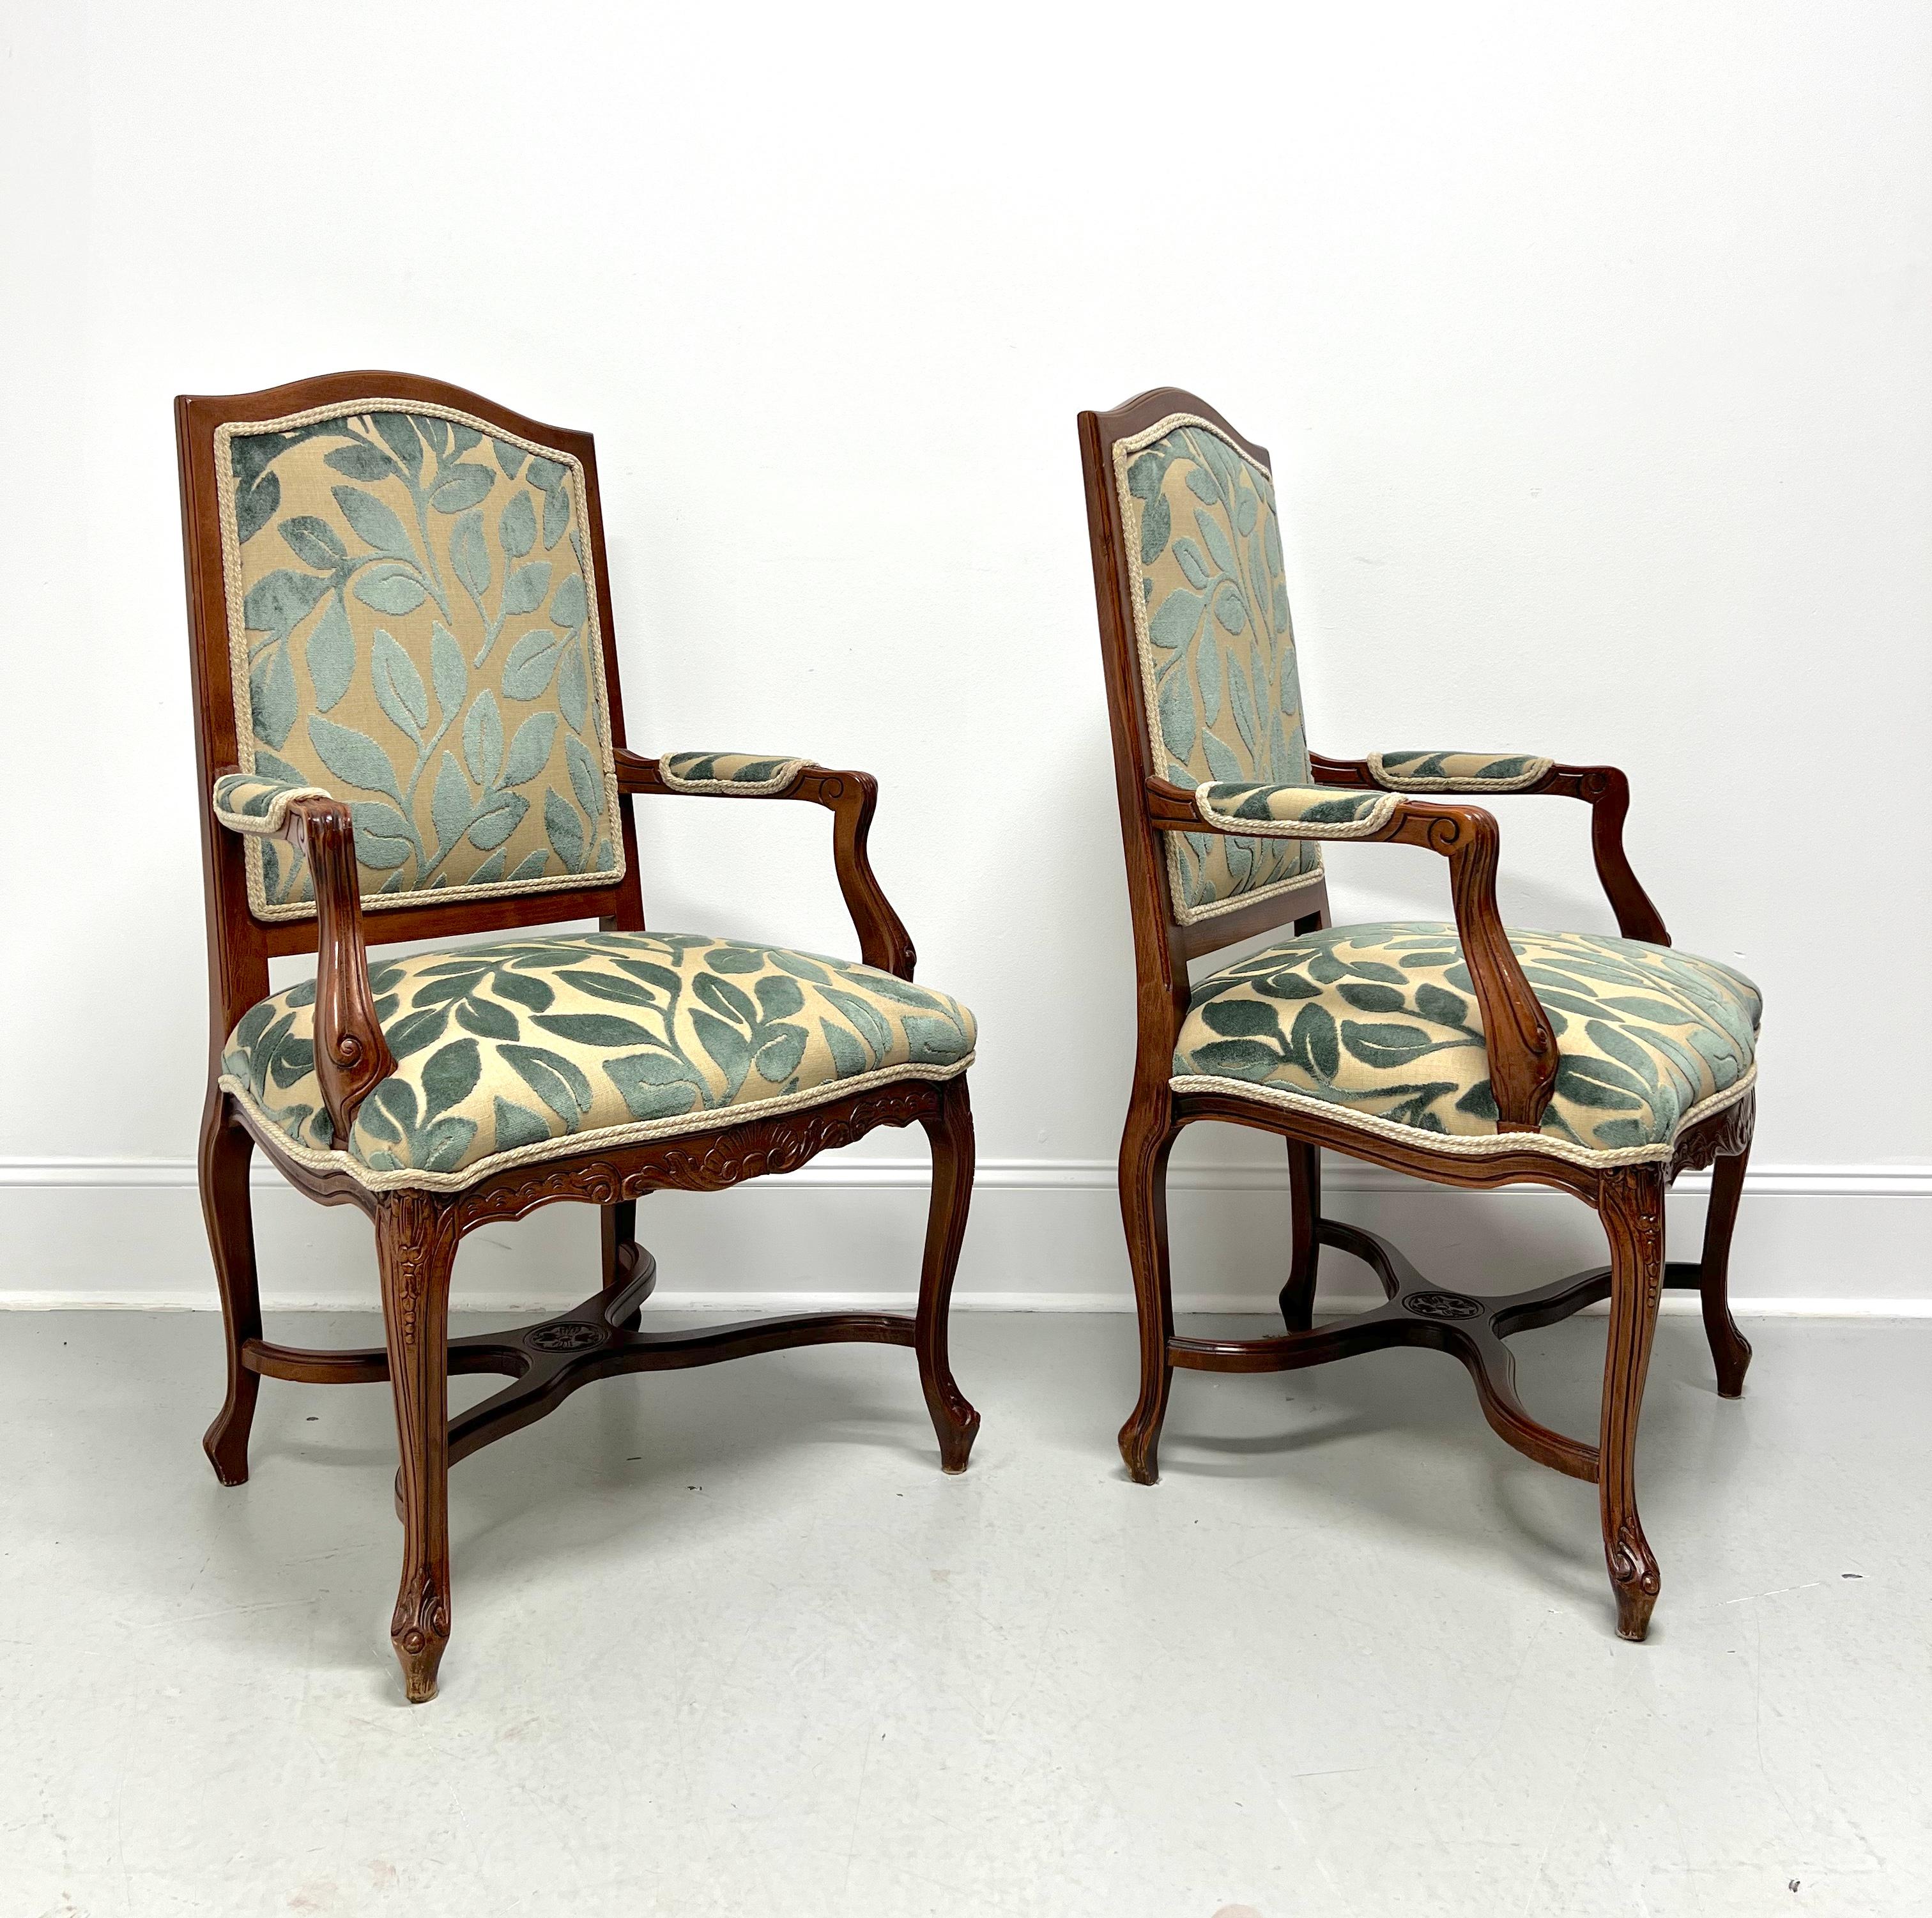 Italian 20th Century French Country Louis XV Walnut Fauteuils Open-Arm Armchairs - Pair For Sale